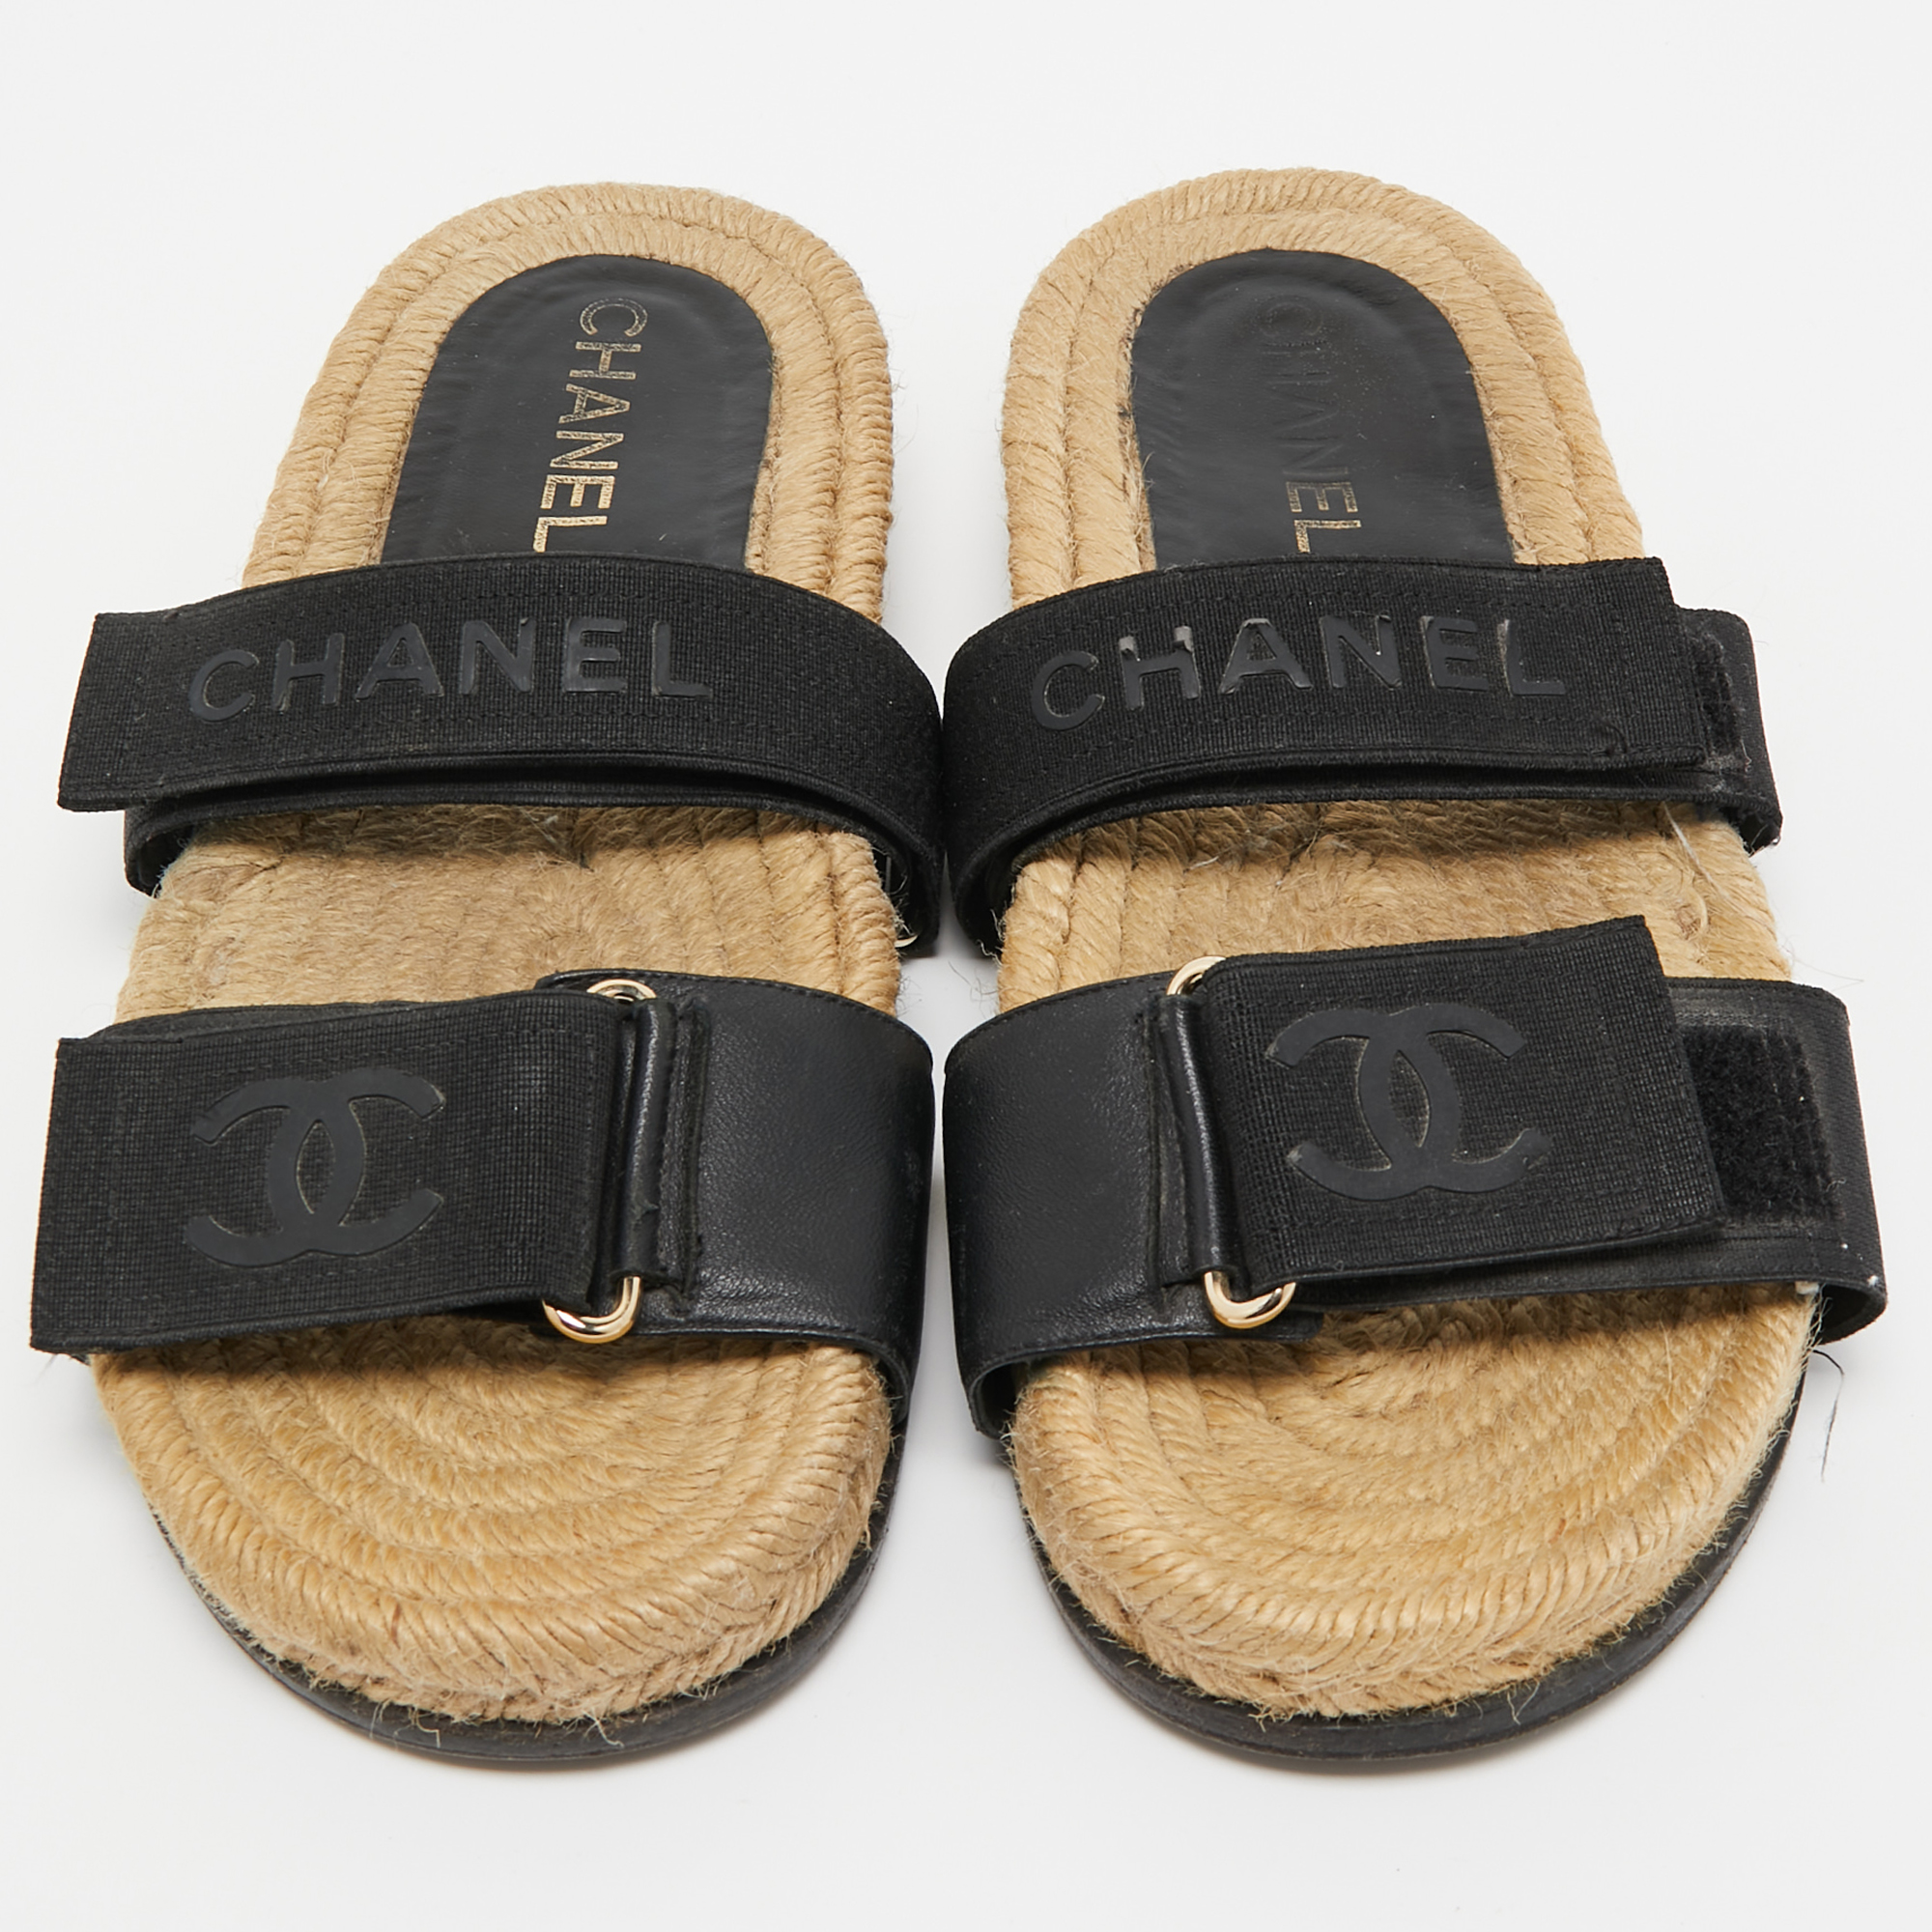 Chanel Black Leather And Canvas CC Velcro Espadrille Flat Sandals Size 37